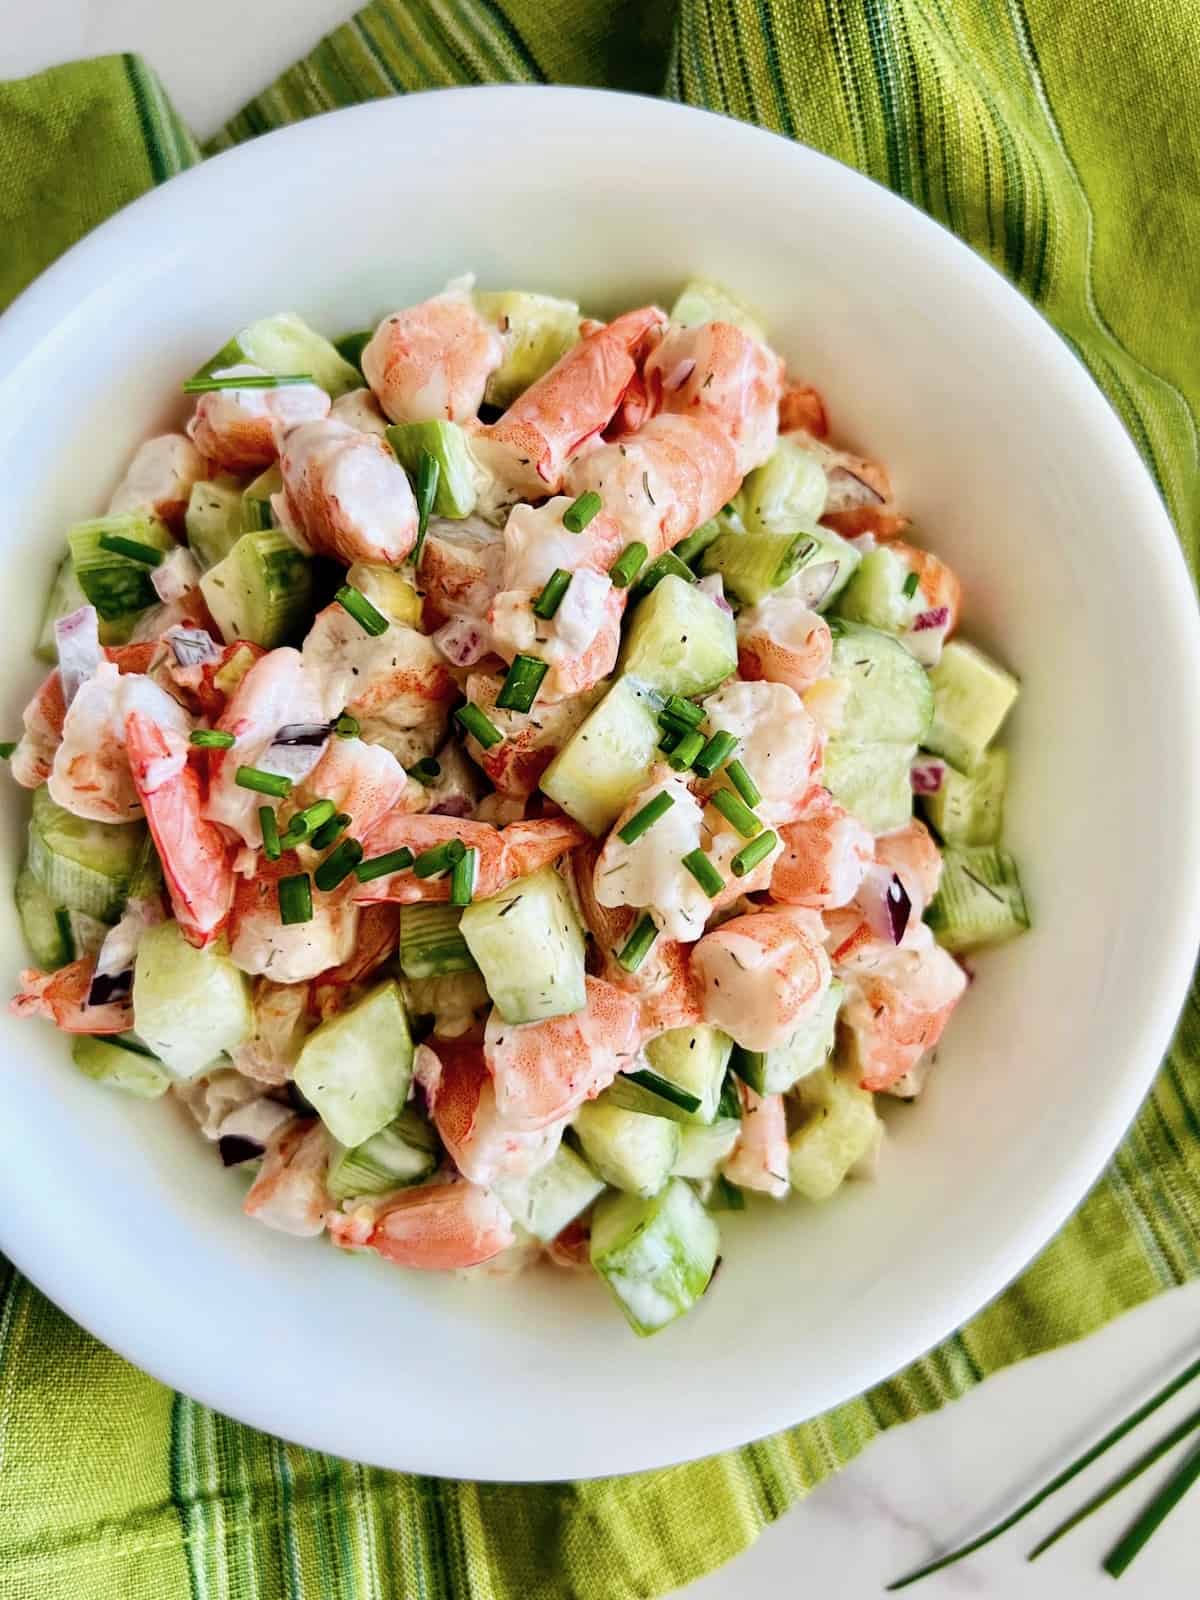 Cucumber Shrimp Salad In a bowl ready to eat with green linen napkin.